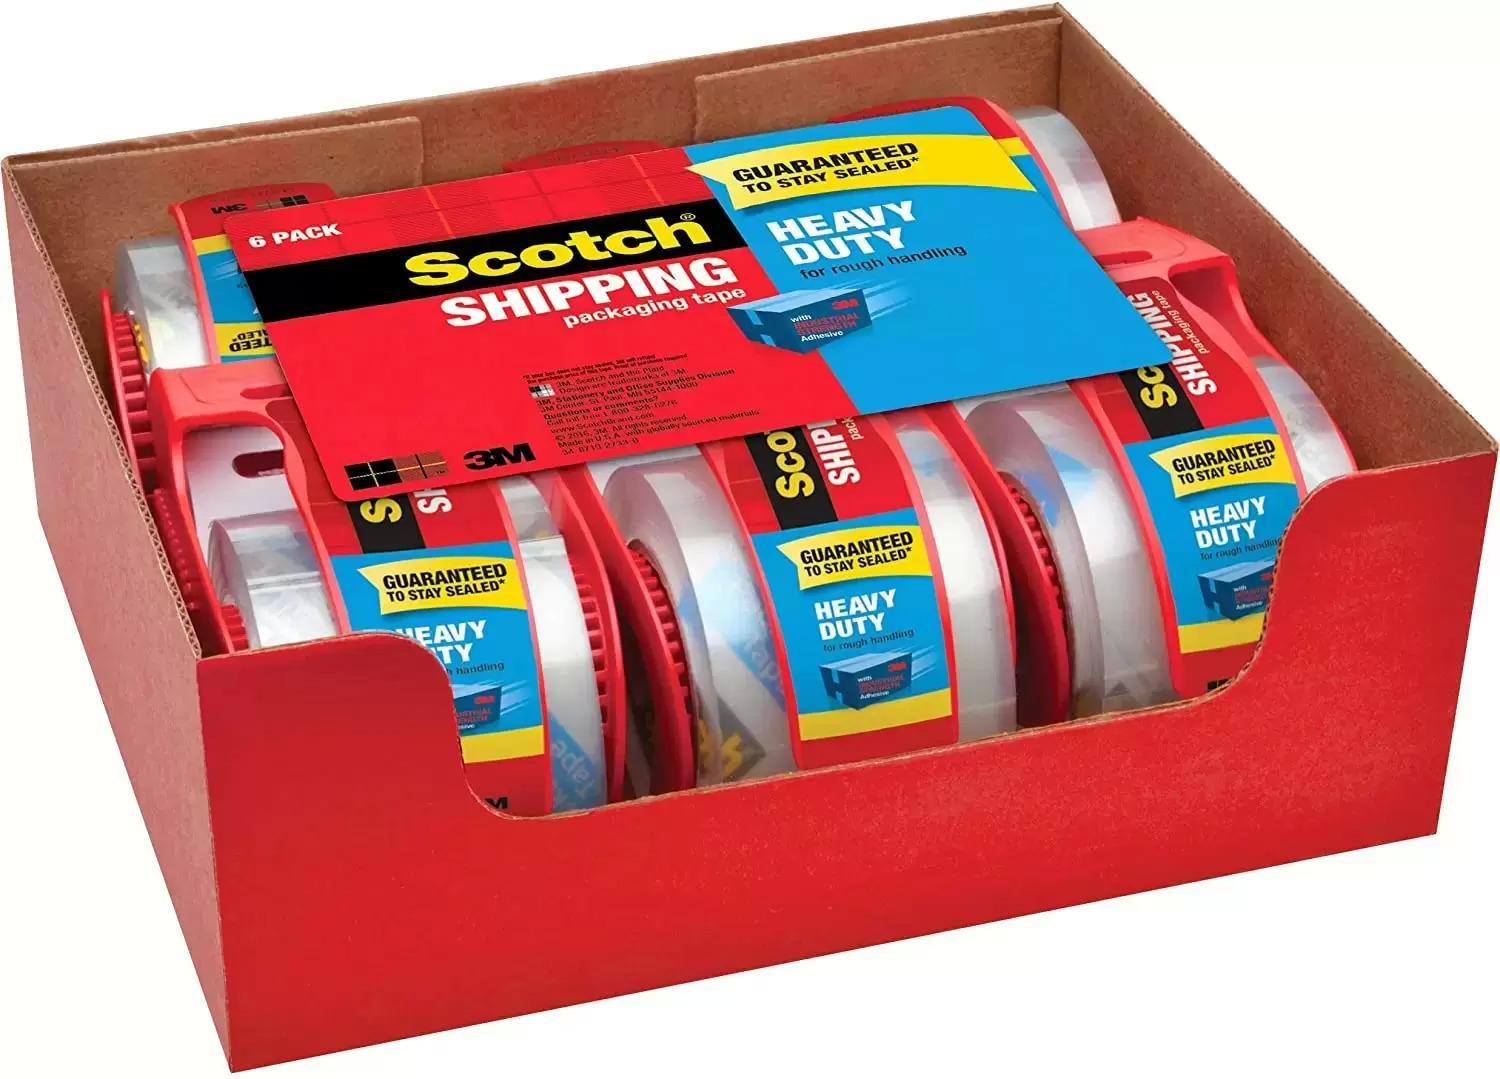 6 Scotch Heavy Duty Packaging Tape with Dispenser for $9.99 Shipped